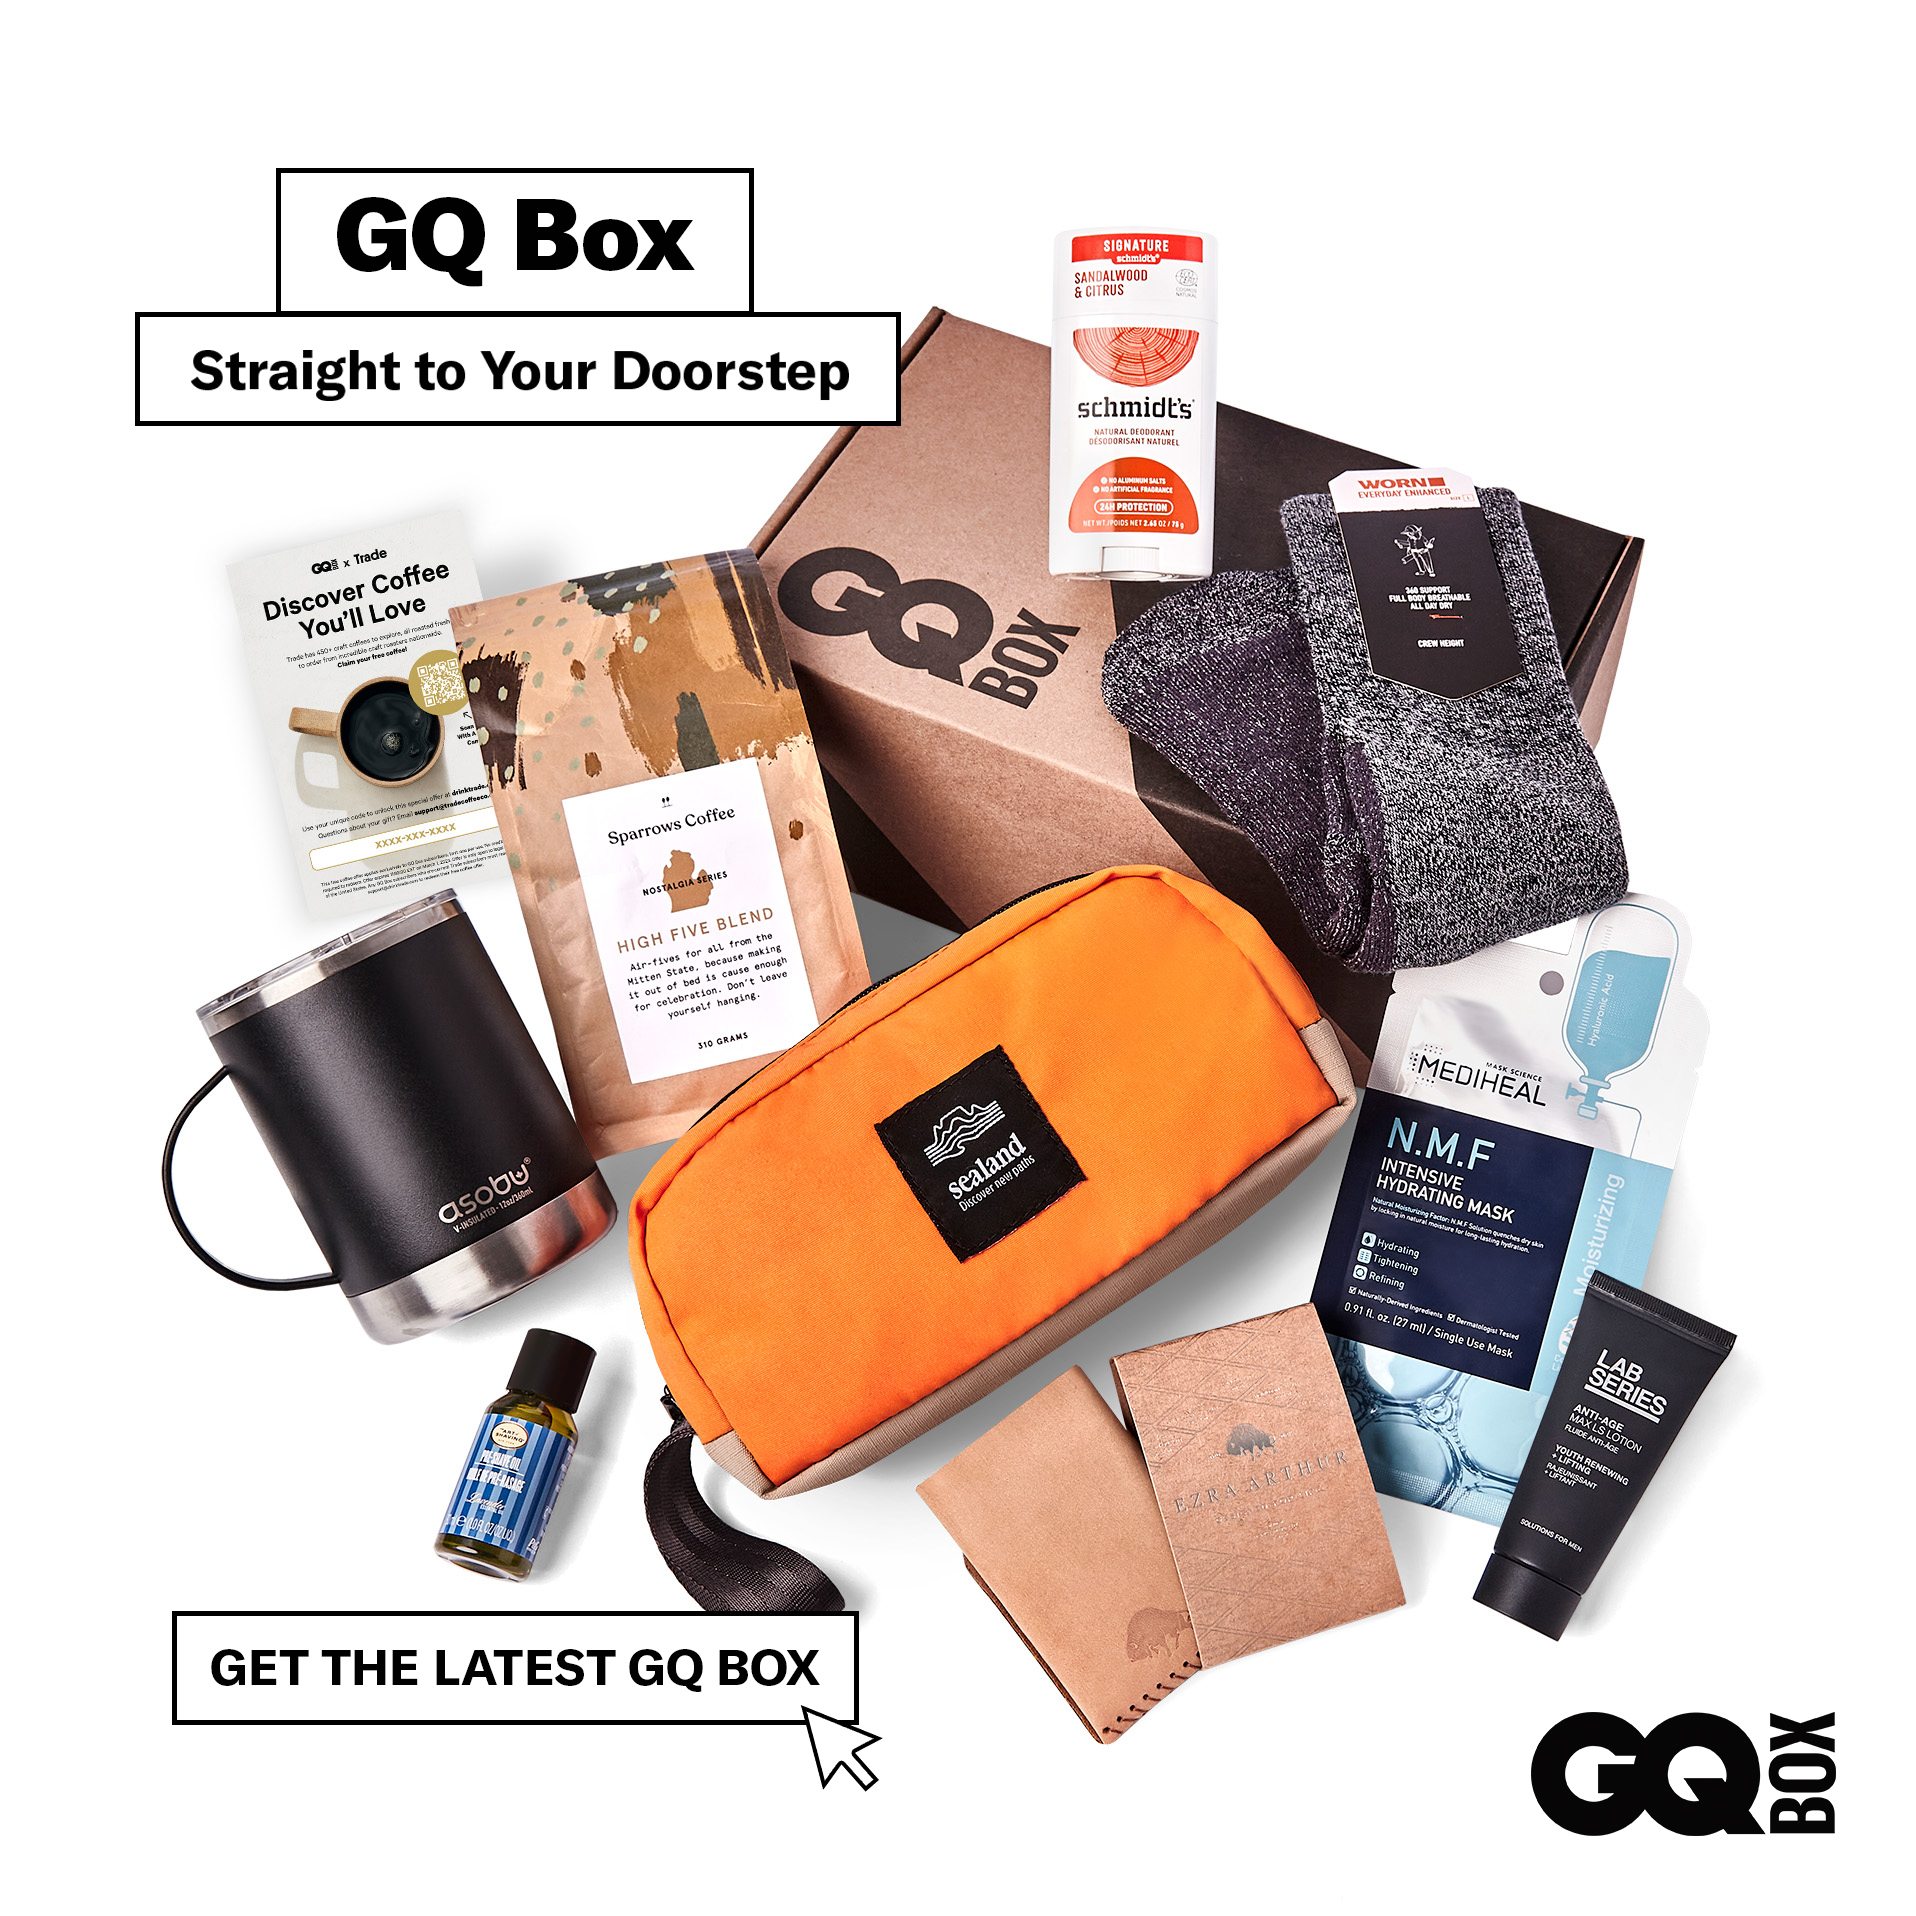 Sign up for the GQ Box